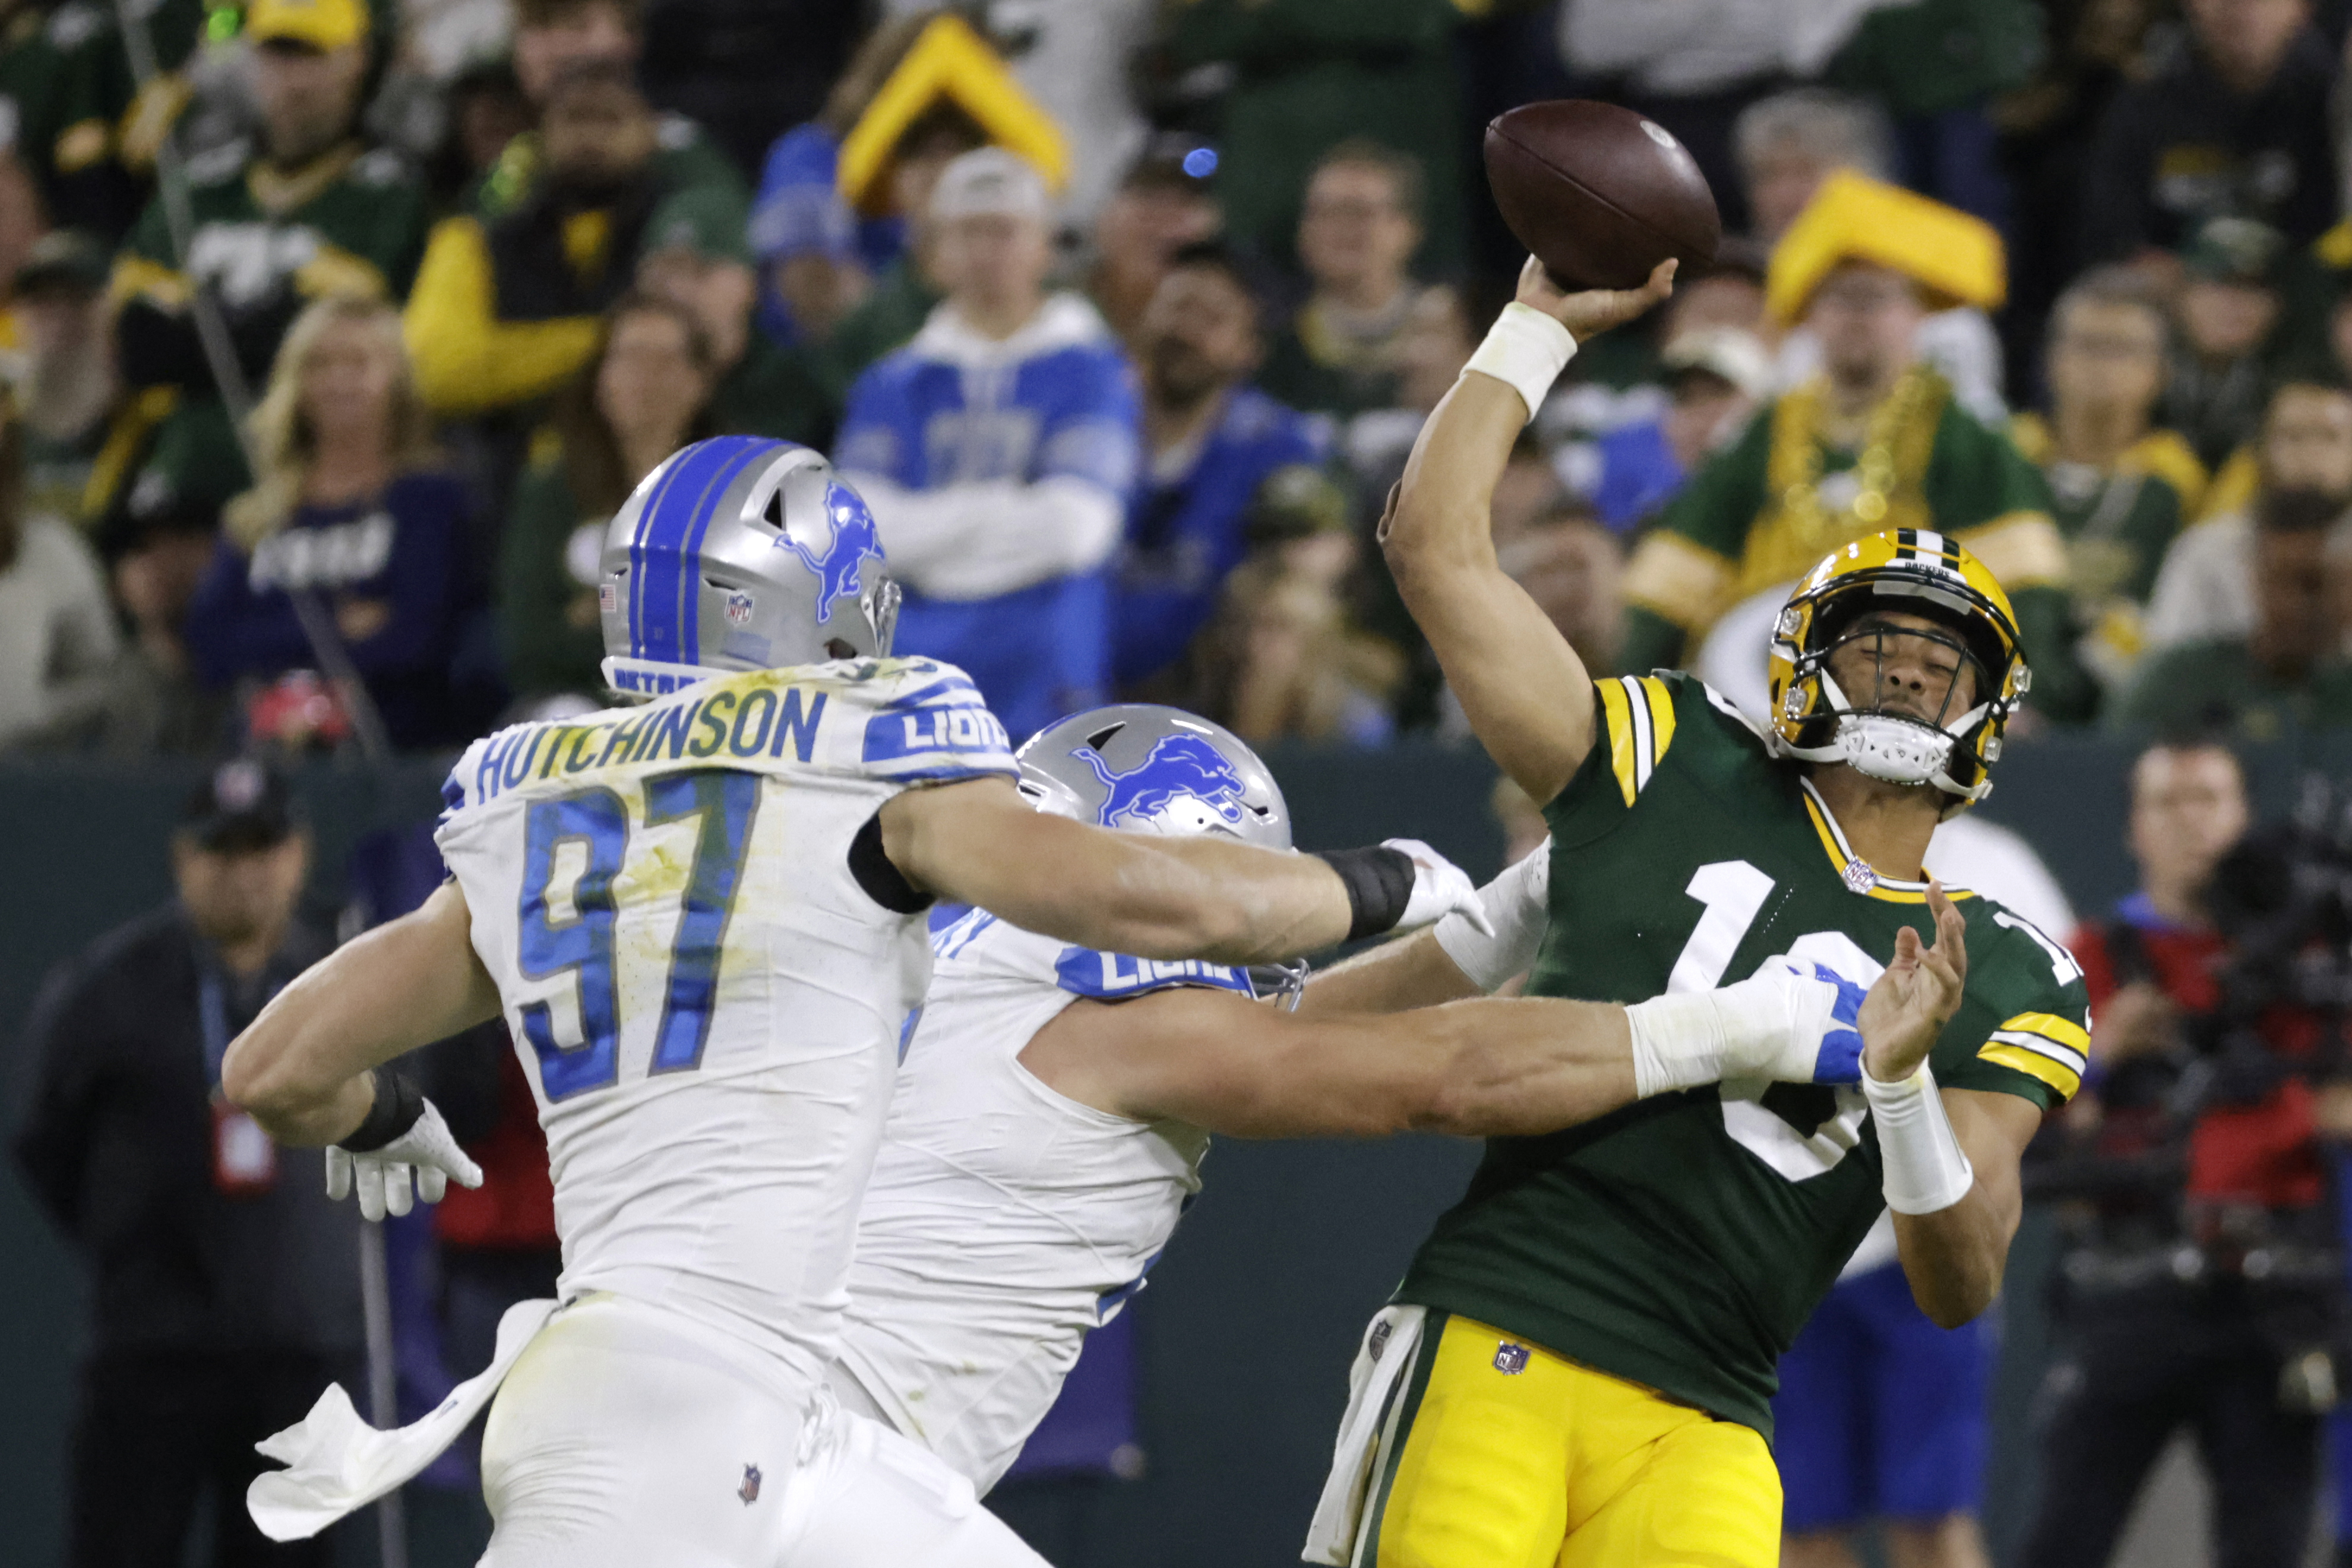 Montgomery breaks out, scores 3 TDs on Packers